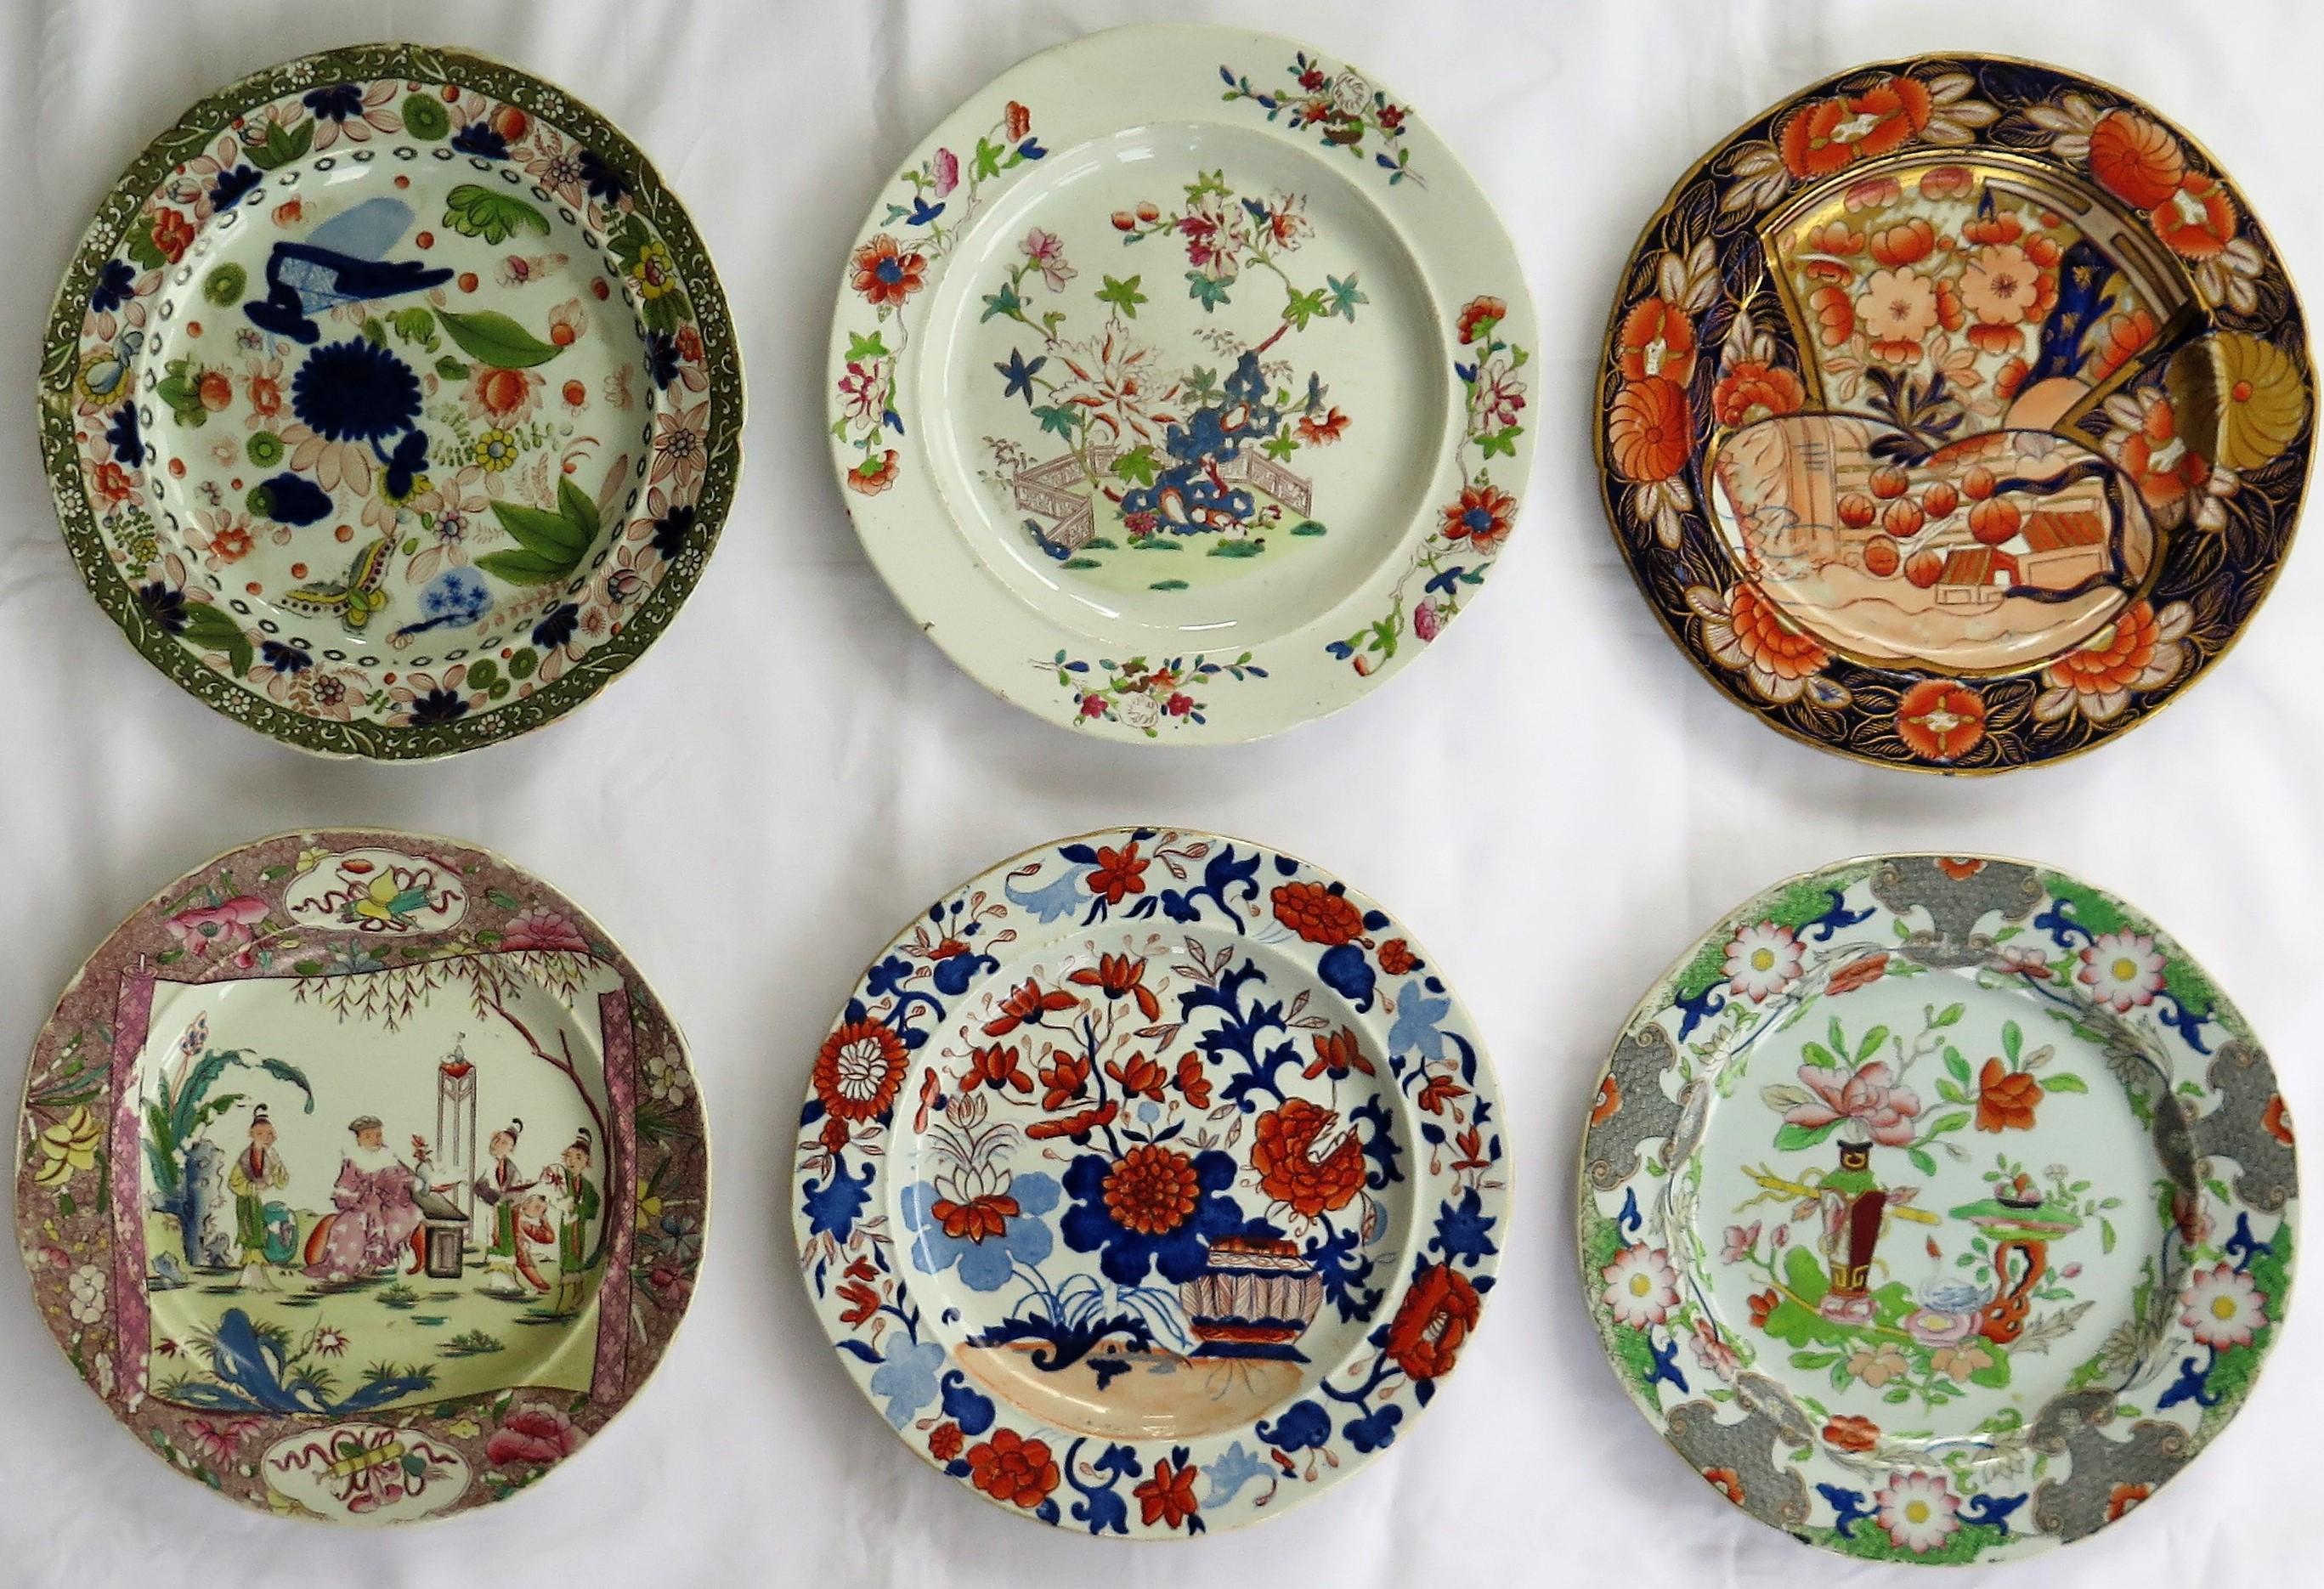 This is a harlequin set of six Mason's Ironstone dinner plates, all dating to the earliest period between 1813 and 1820.

All the plates are circular with a notched rim and of the same nominal size of about 9.5 inches diameter, but have different